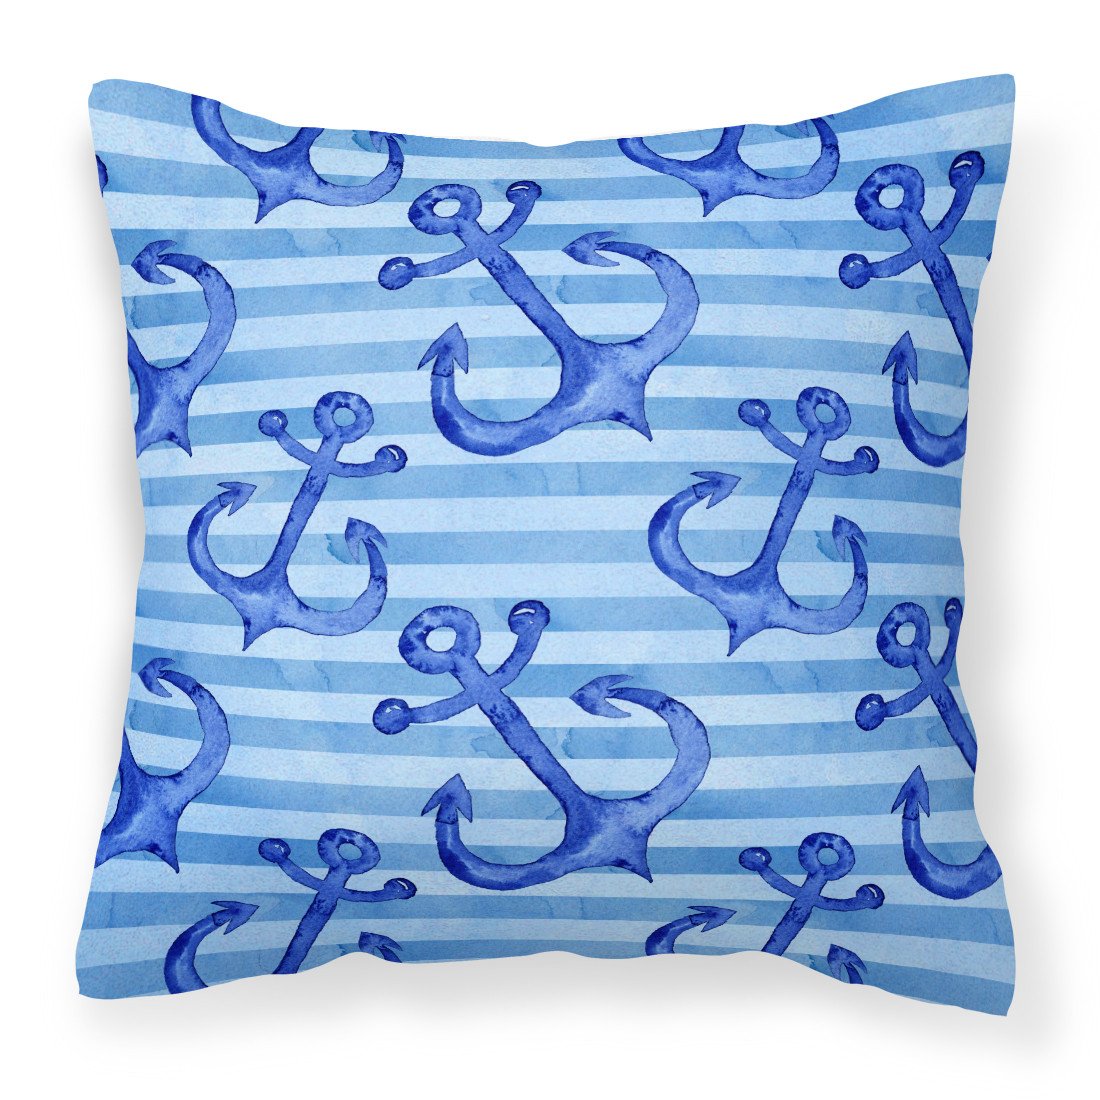 Beach Watercolor Anchors Fabric Decorative Pillow BB7533PW1818 by Caroline's Treasures